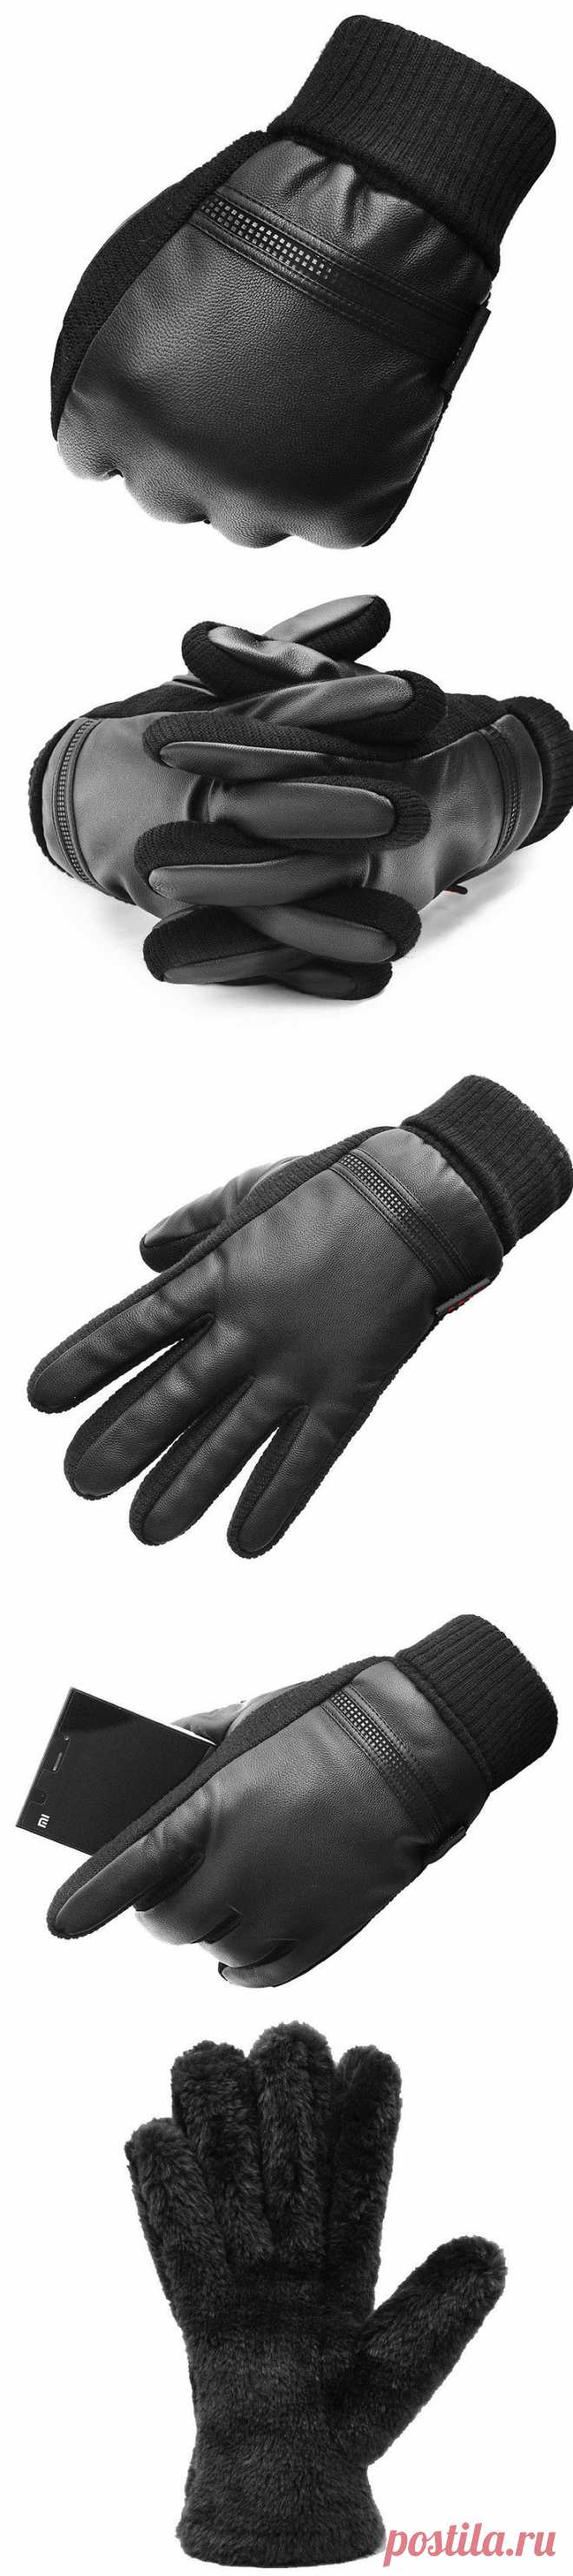 Aliexpress.com : Buy New brand 2015 Fashion clothes accessories Men Black winter gloves driving Warm Leather Mittens guanti pelle uomo from Reliable clothes strawberry suppliers on The perfect pair | Alibaba Group